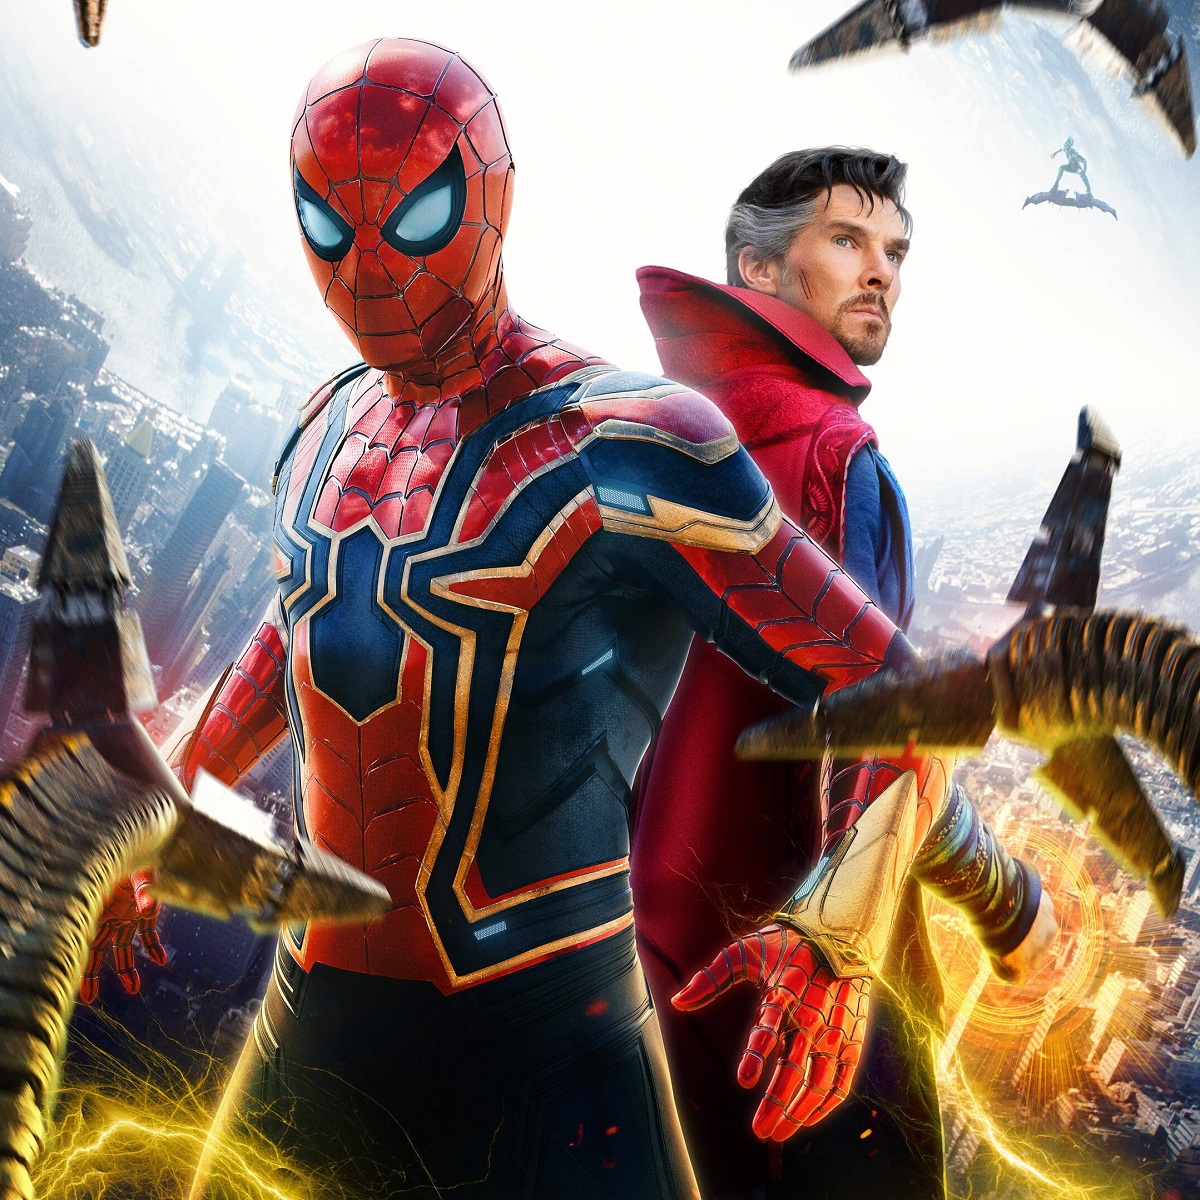 Box Office: Spiderman No Way Home creates history – Sells 50,000 tickets in just 3 hours at PVR